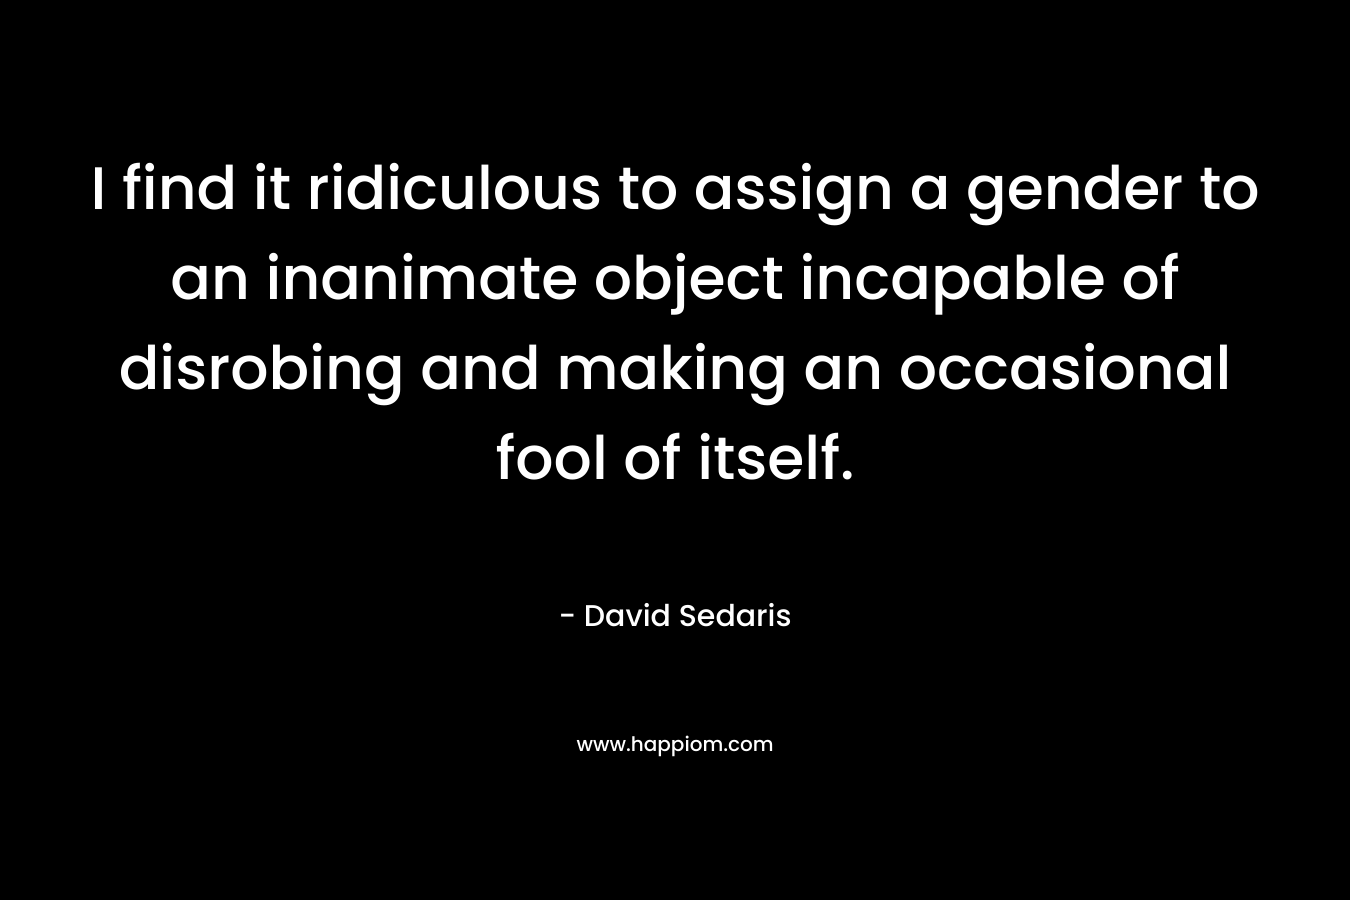 I find it ridiculous to assign a gender to an inanimate object incapable of disrobing and making an occasional fool of itself.